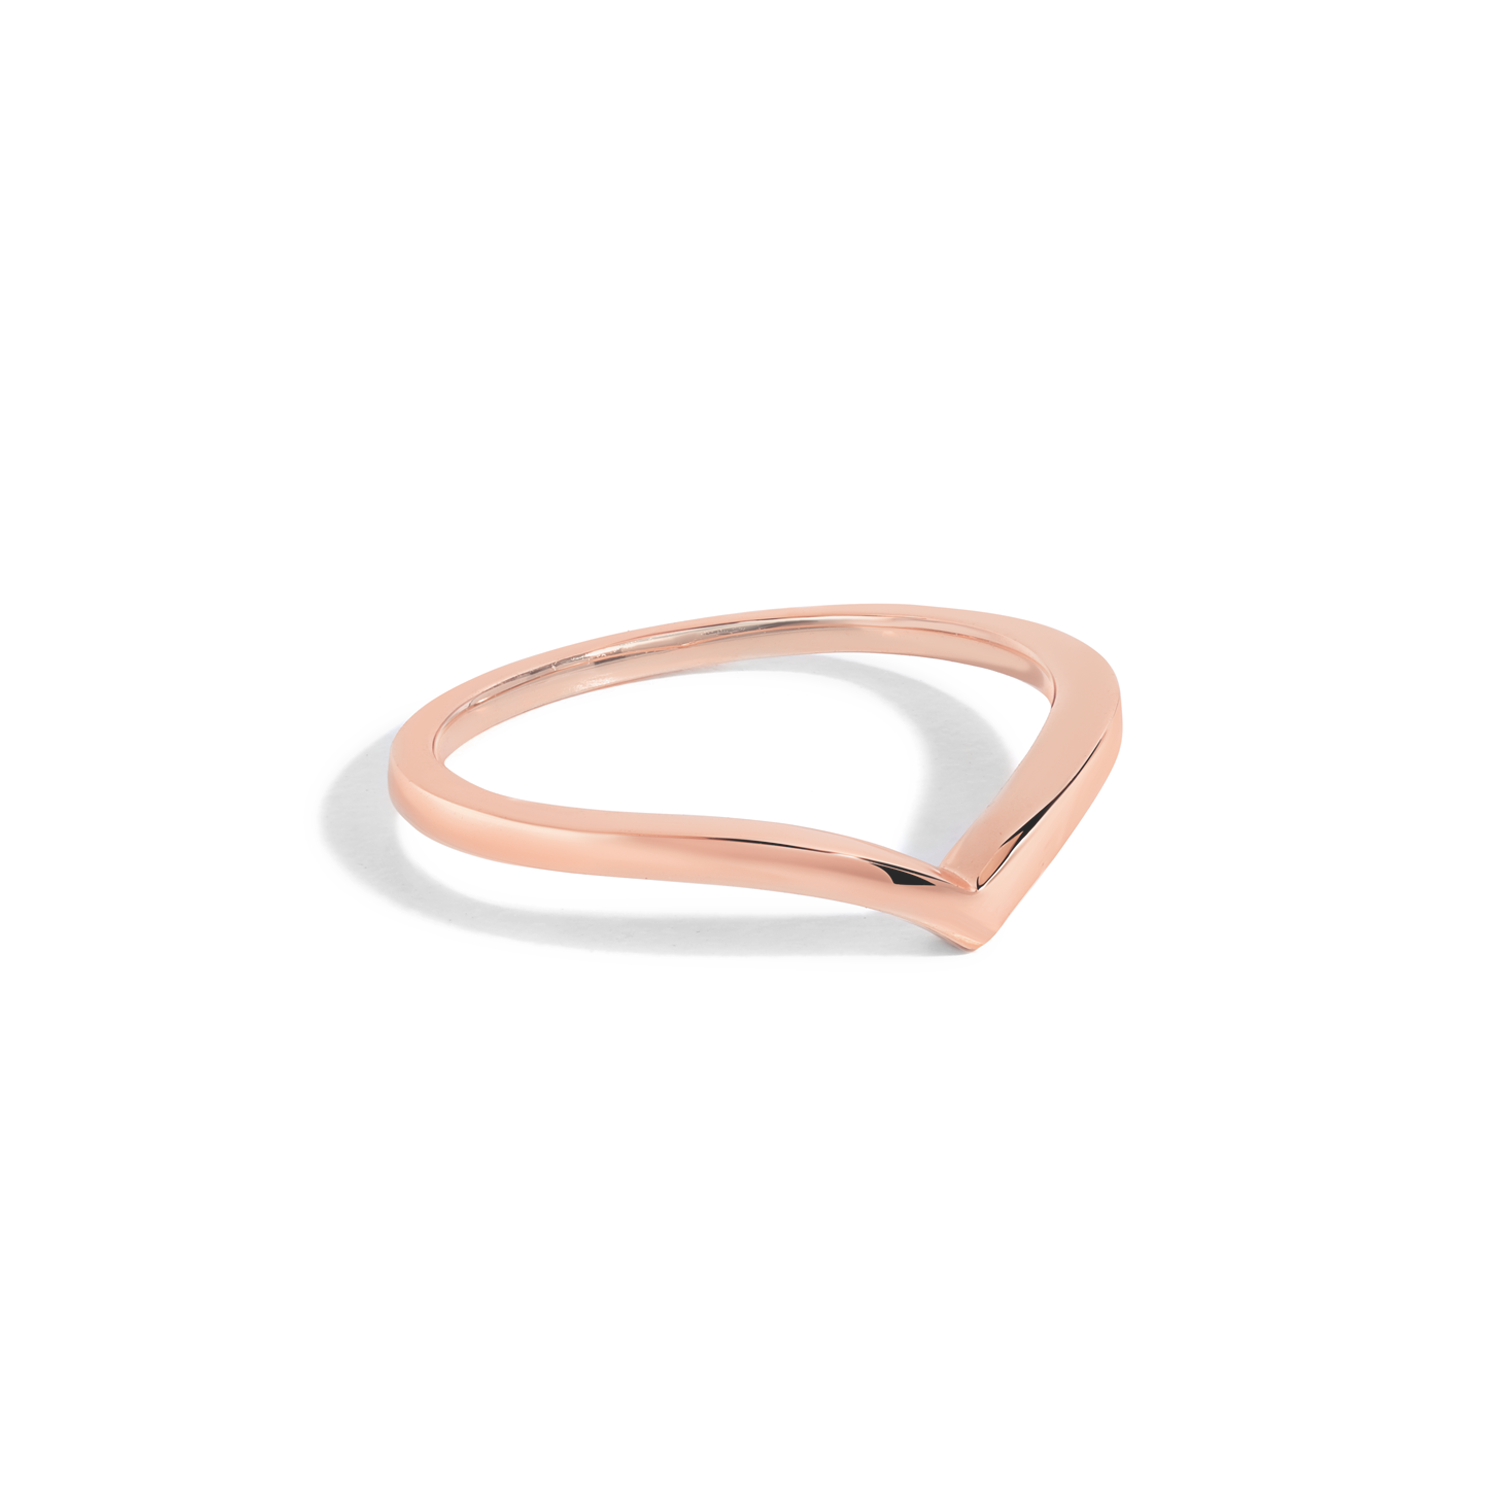 Elegant and classy double ring set in rose gold.